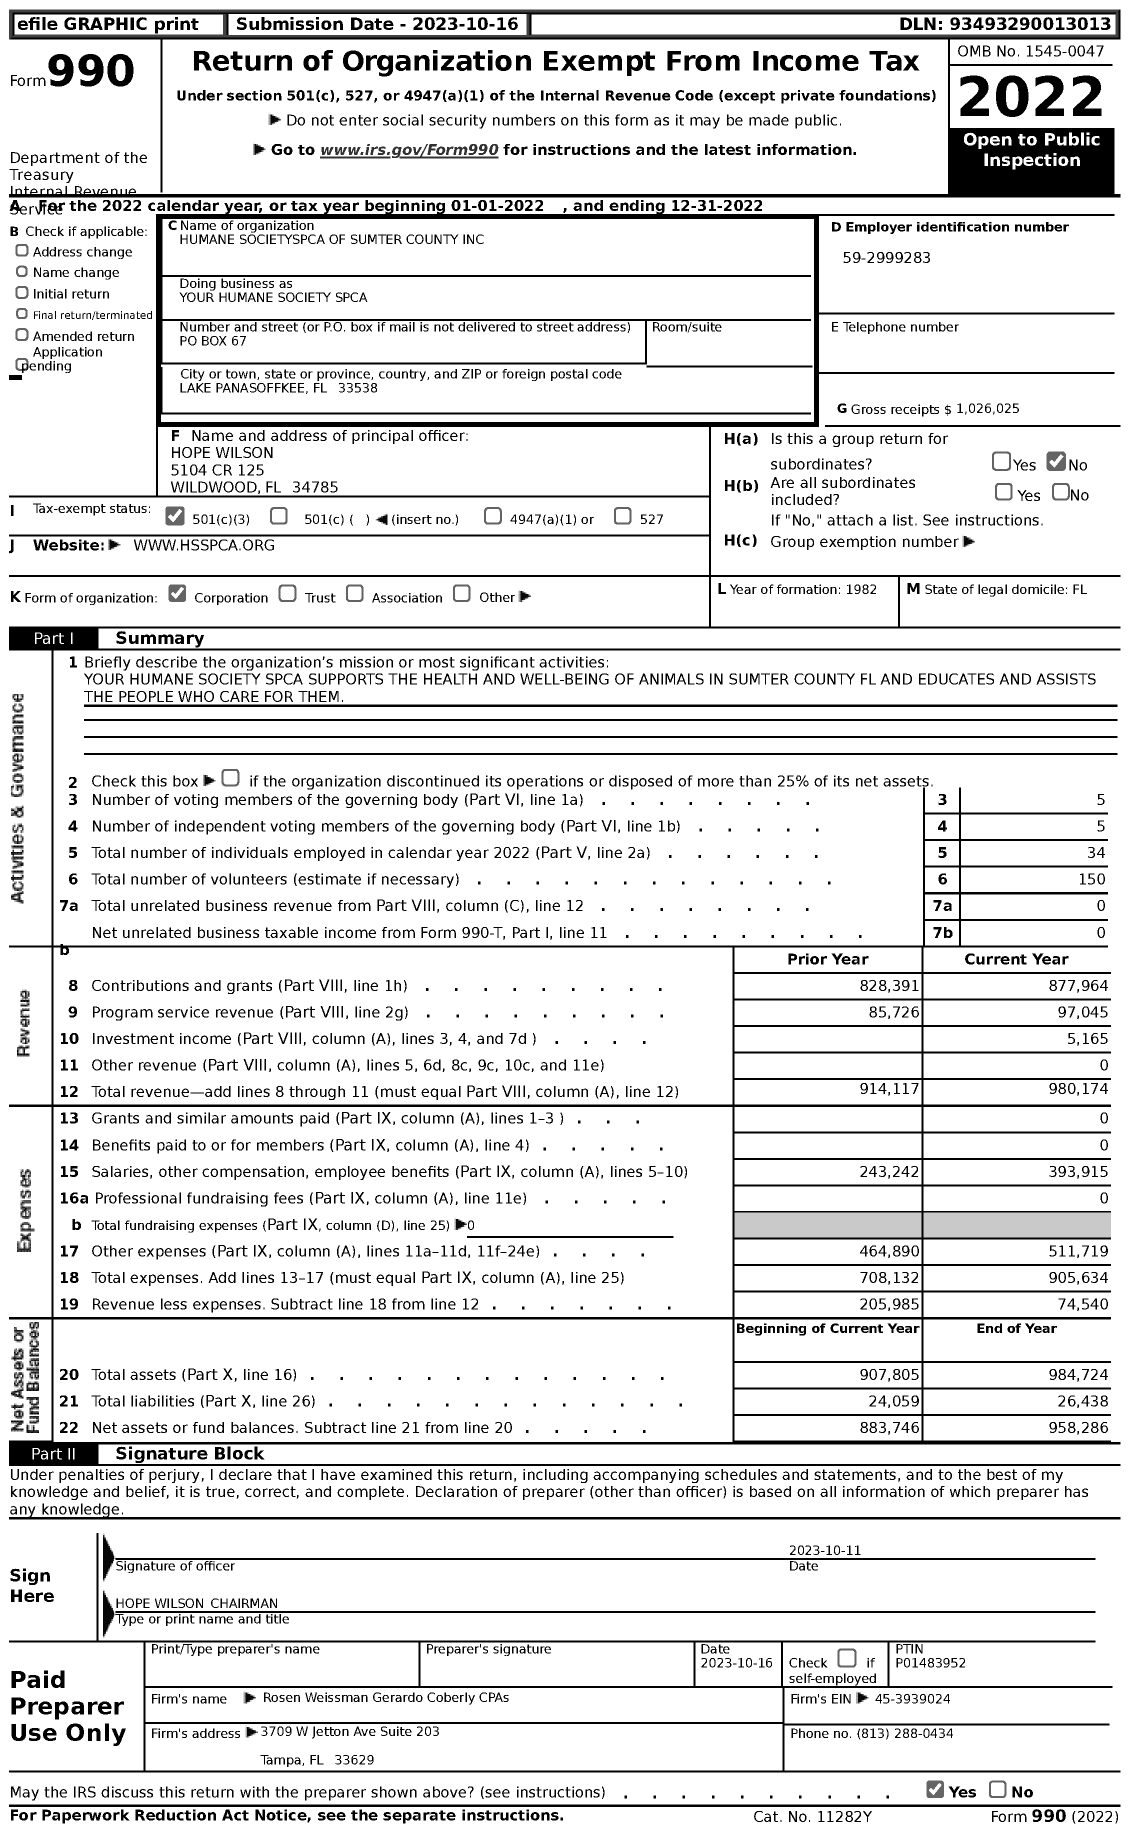 Image of first page of 2022 Form 990 for Your Humane Society SPCA